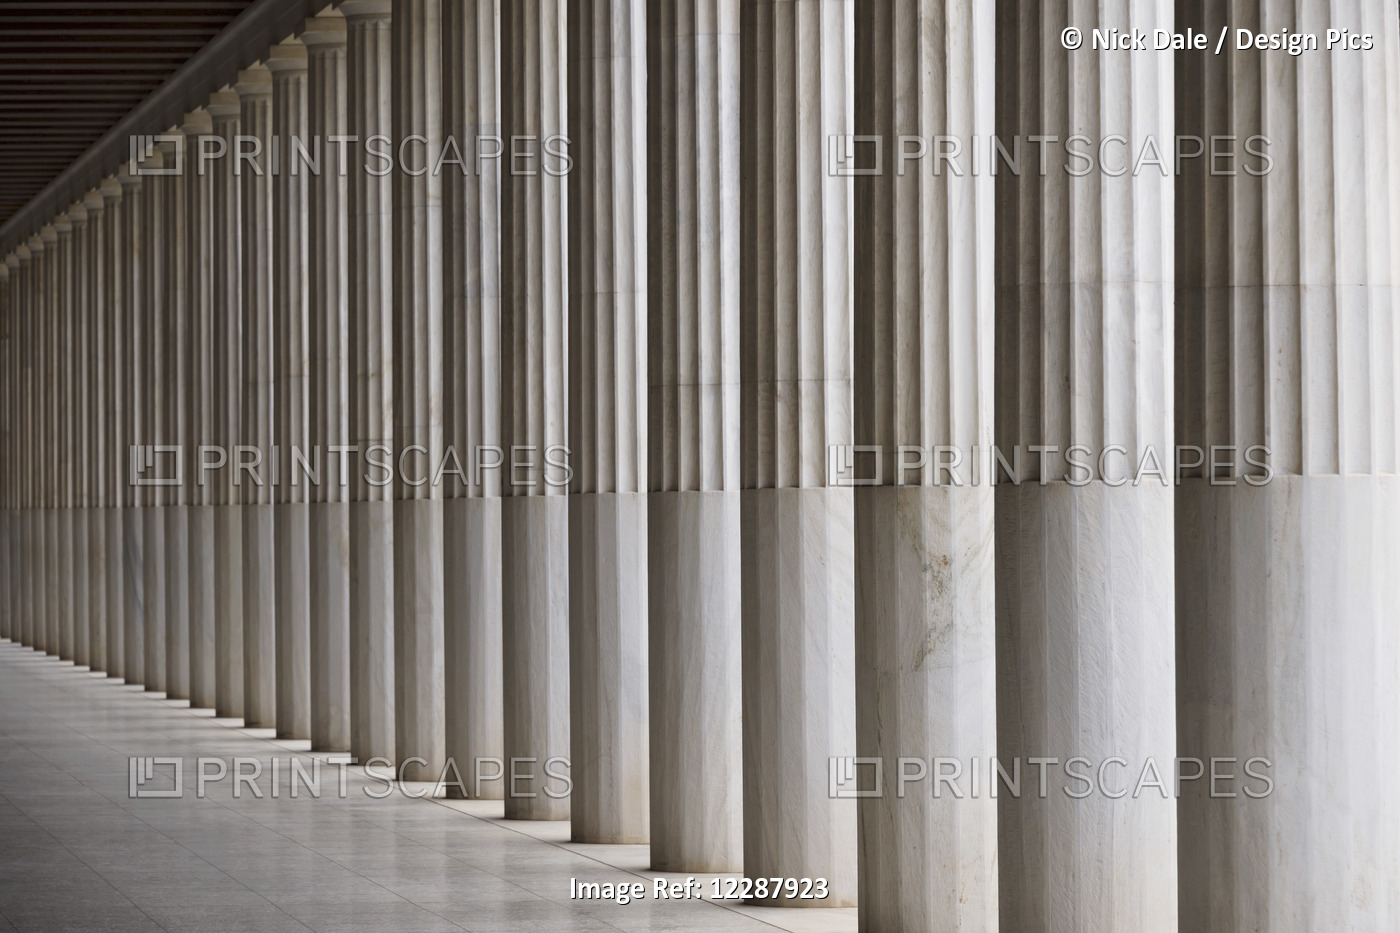 Stoa Of Attalos Marble Ceiling And Colonnade; Athens, Attica, Greece